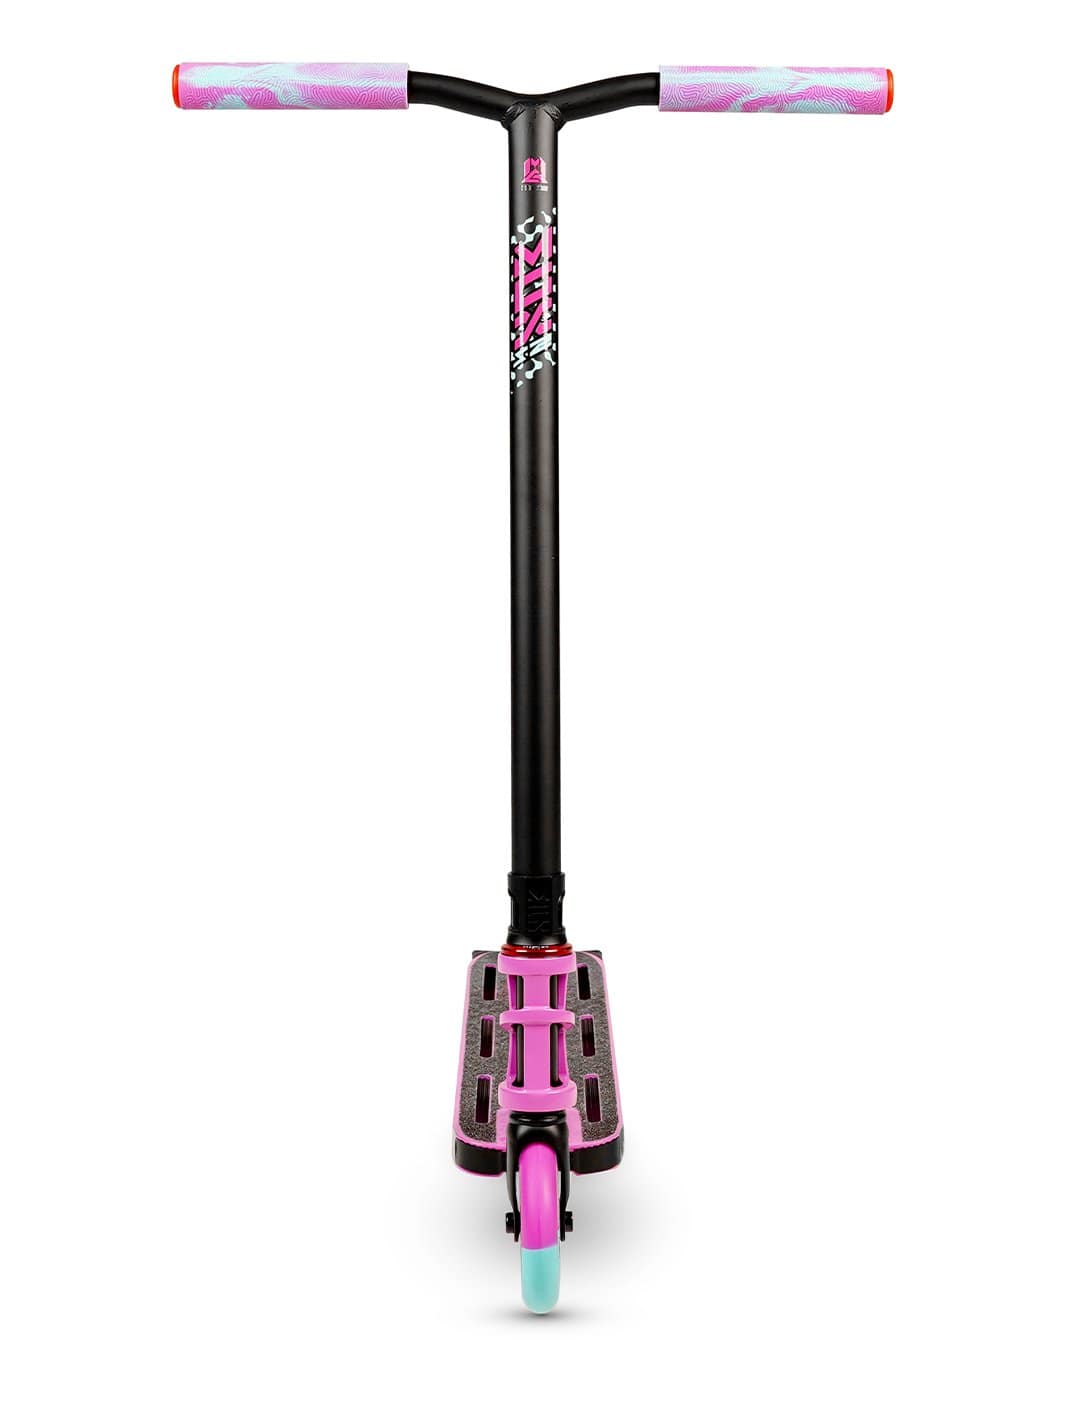 Madd Gear MGP MGX S2 Shredder Stunt Pro Scooter Complete High Quality Razor Trick Skate Park Mad Pink Teal Ripa Aluminum Cores